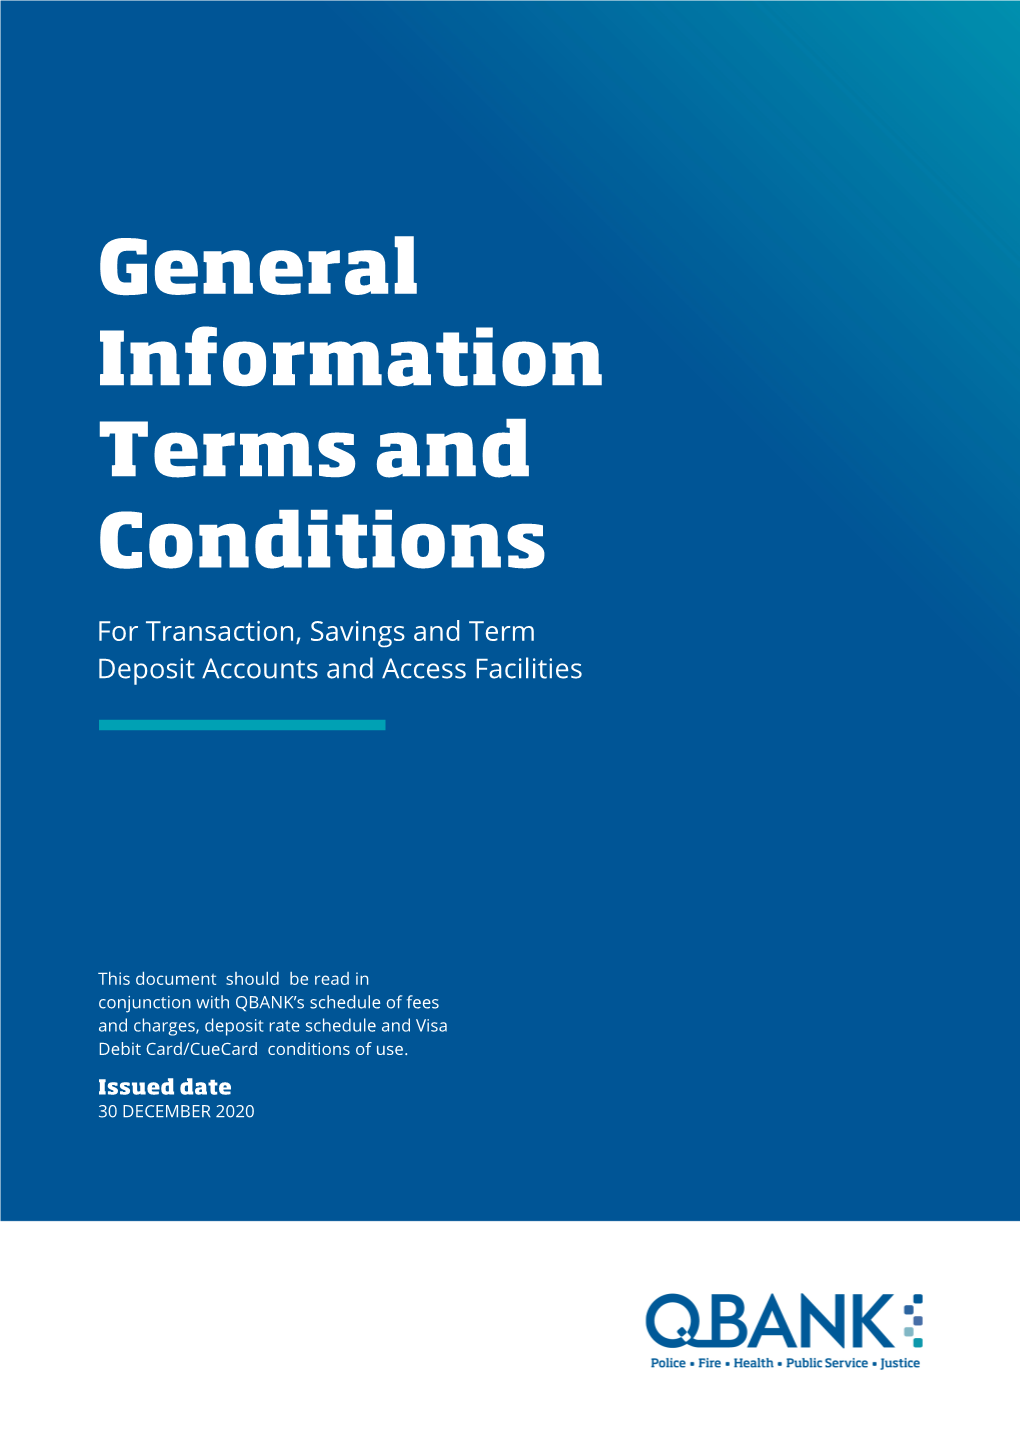 General Information Terms and Conditions